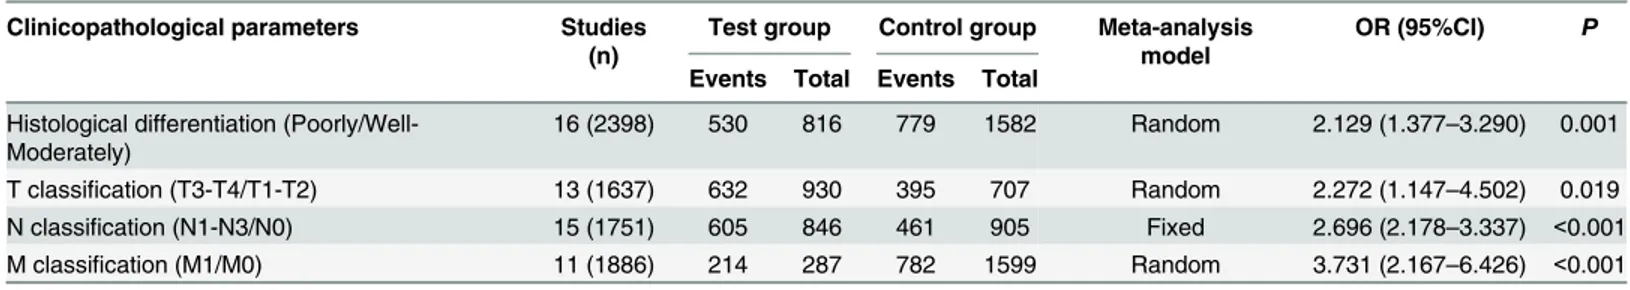 Table 2. Combinations of data evaluating the relationships between AEG-1 SI and clinicopathological parameters.